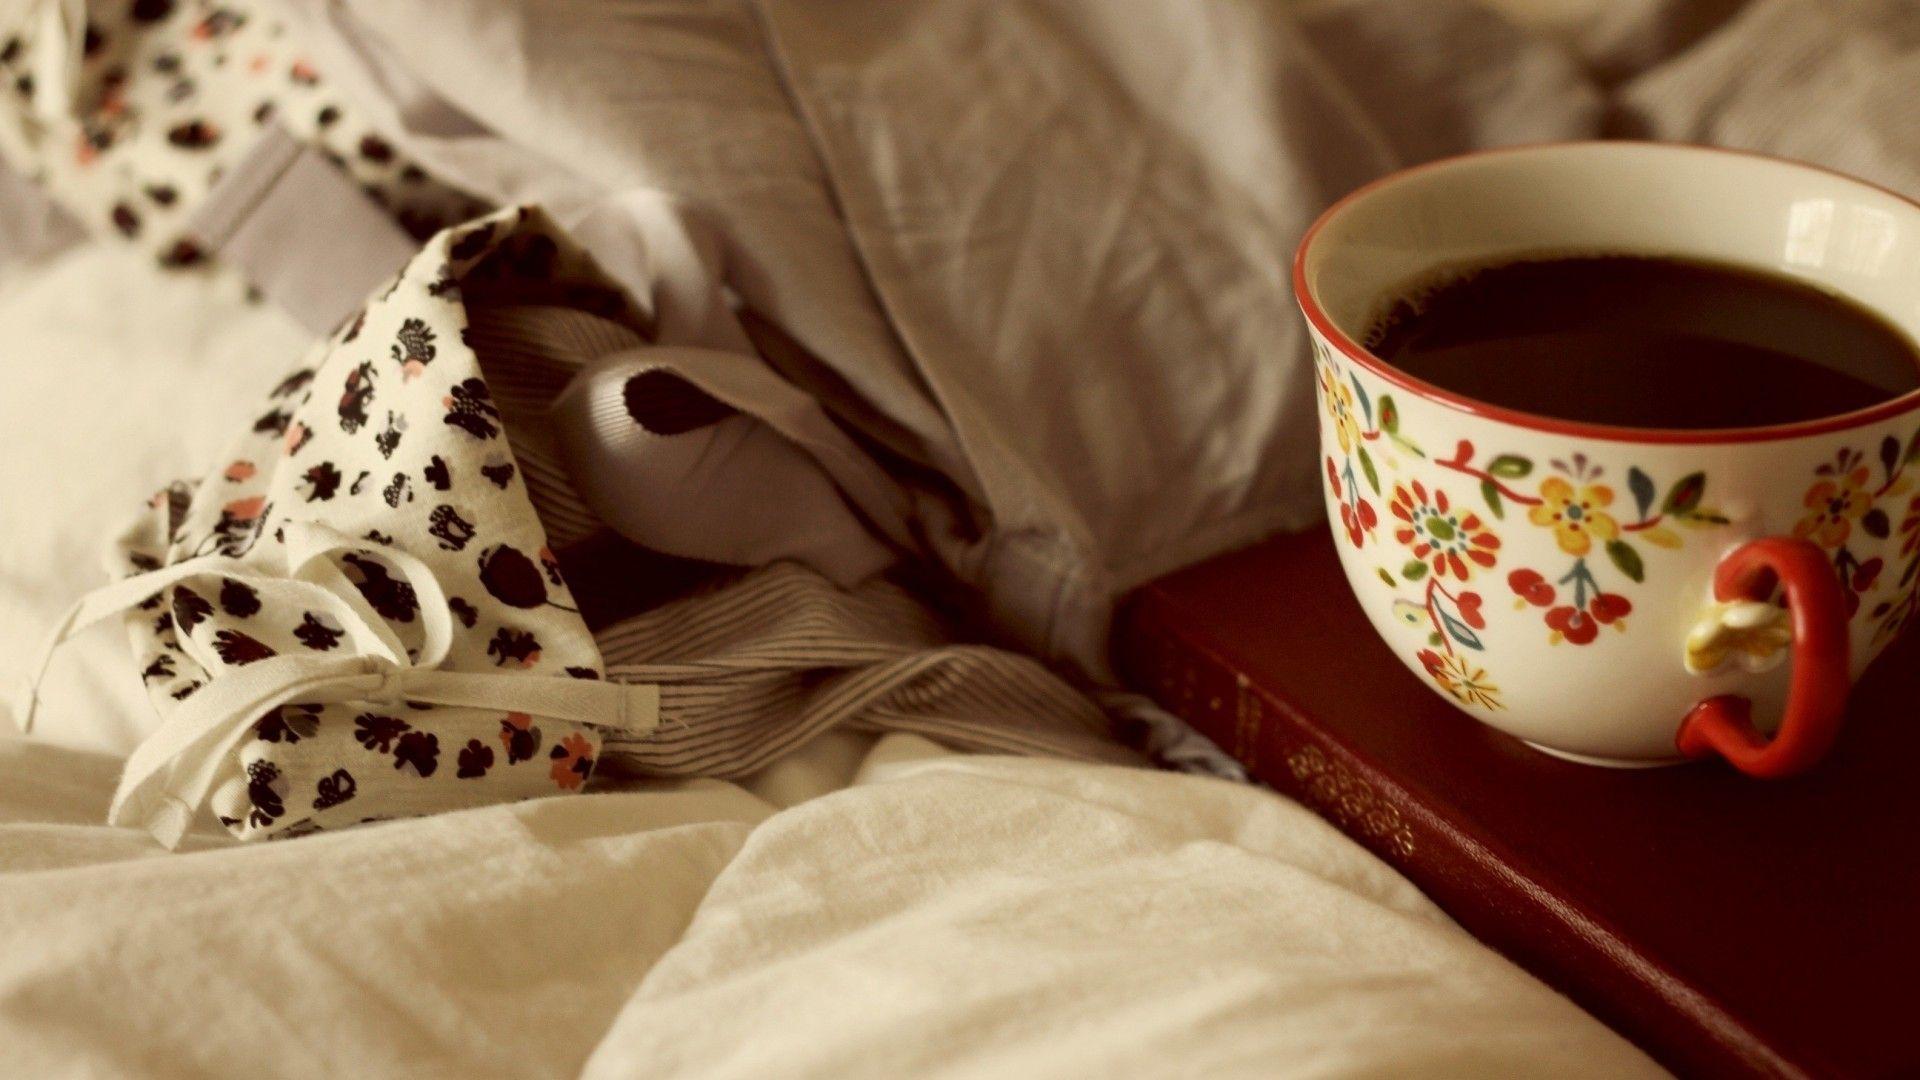 Blanket / Warm / Winter / Coffee / Book / Cosy. COFFEE & COSYNESS